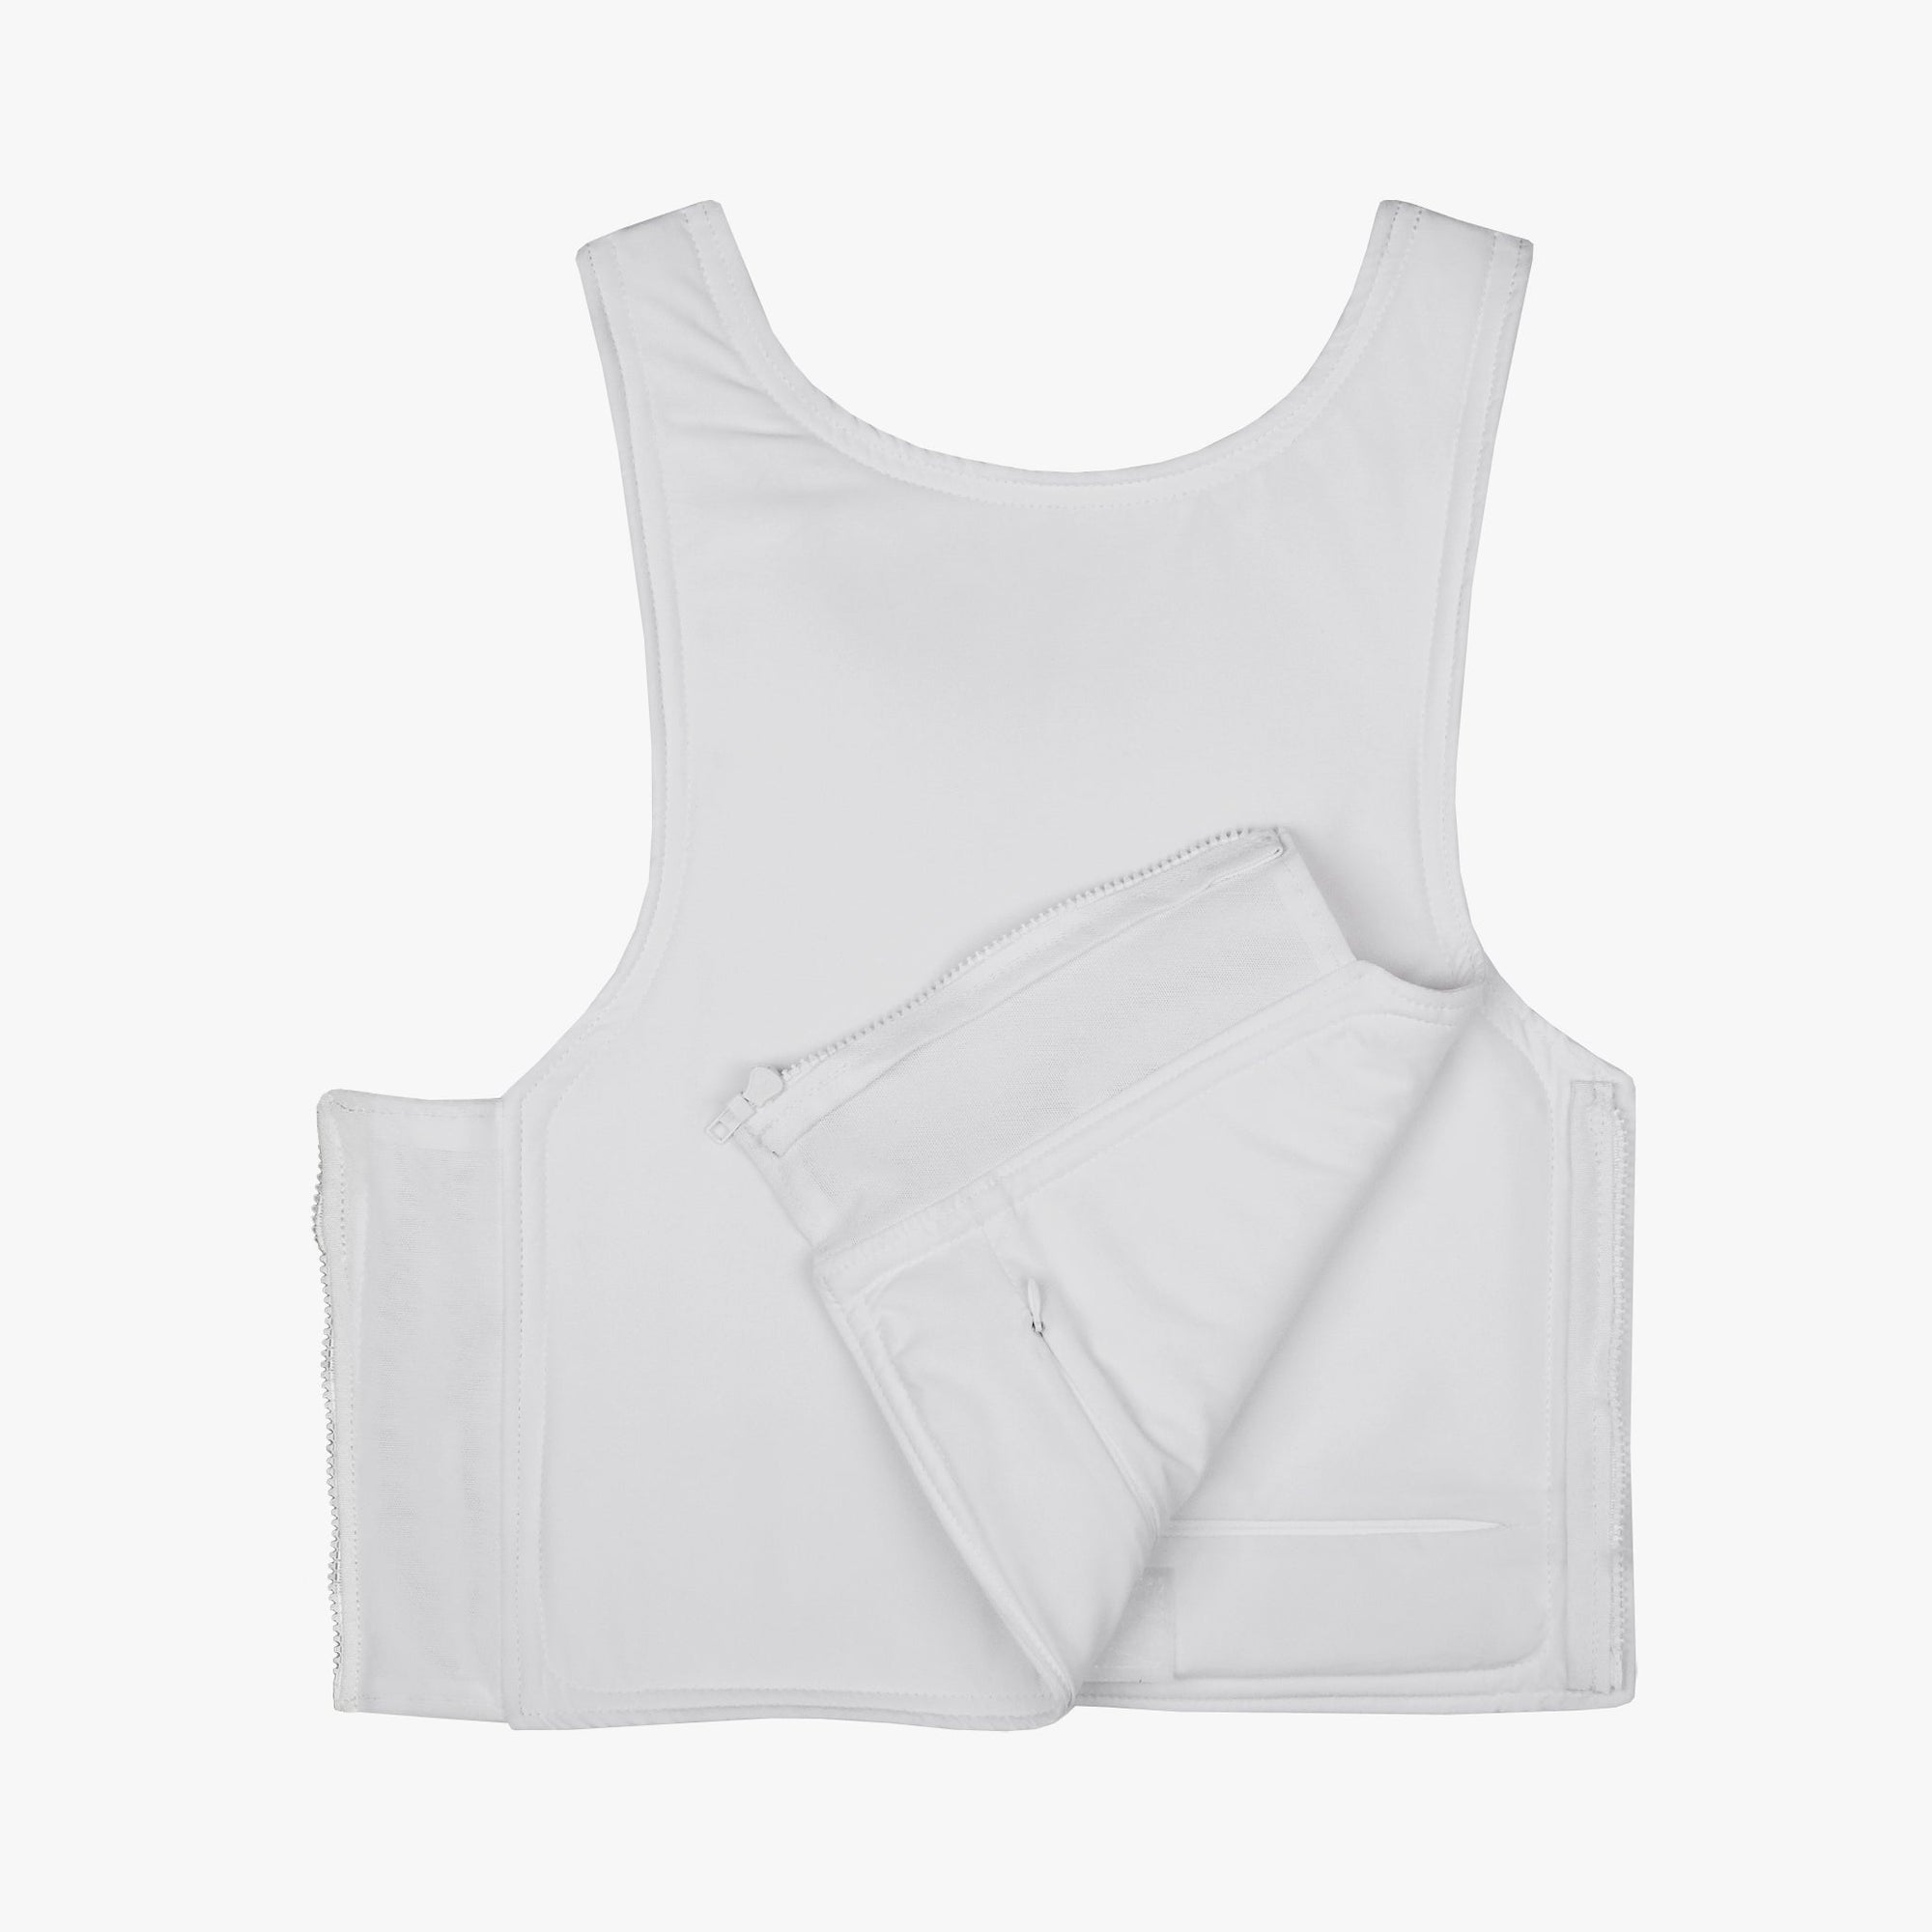 A carrier for one of our best selling bulletproof vests in white. This carrier does not come with level 3a soft armor panels. 